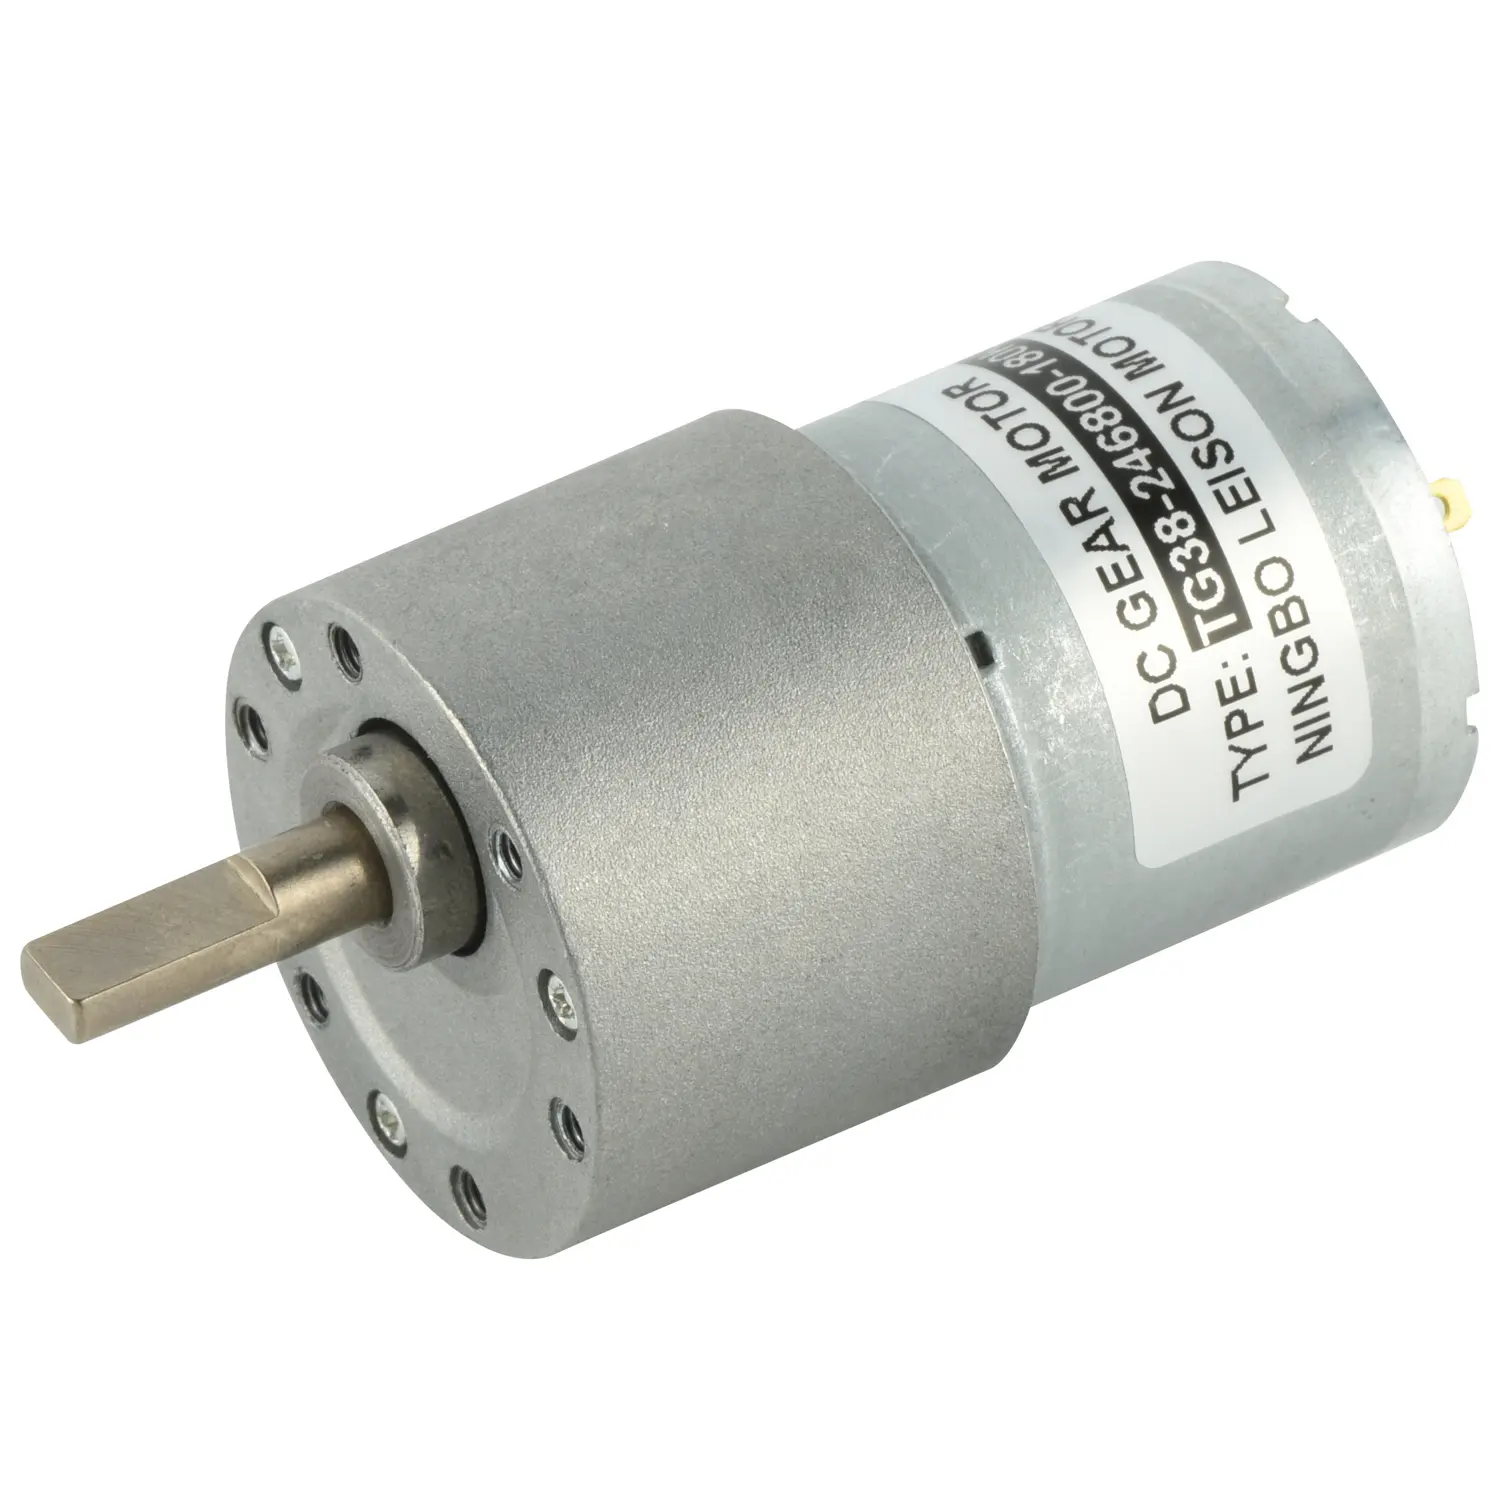 12v 24v 37mm Gearbox Eccentric Shaft Dc Gear Motor For RC Car Robot Speed 1RPM to 3000RPM customized